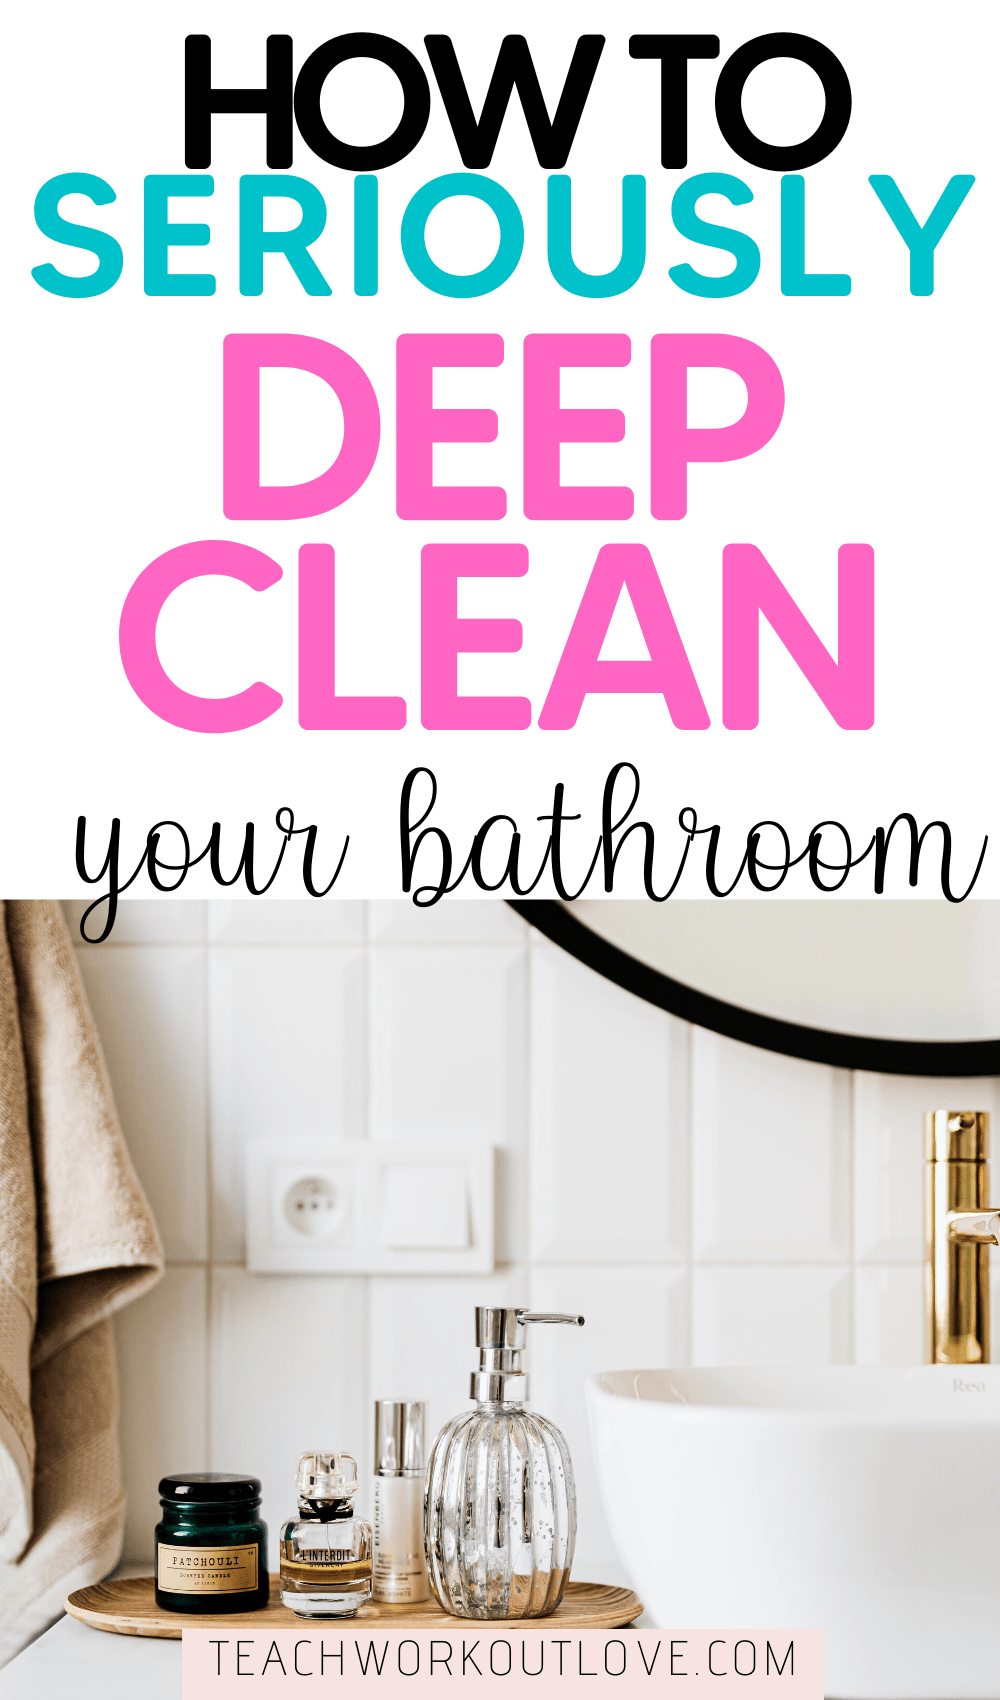 We all clean our bathrooms on a daily basis, but unfortunately, they still need some deep disinfecting and deep cleaning once in a while - here's how.